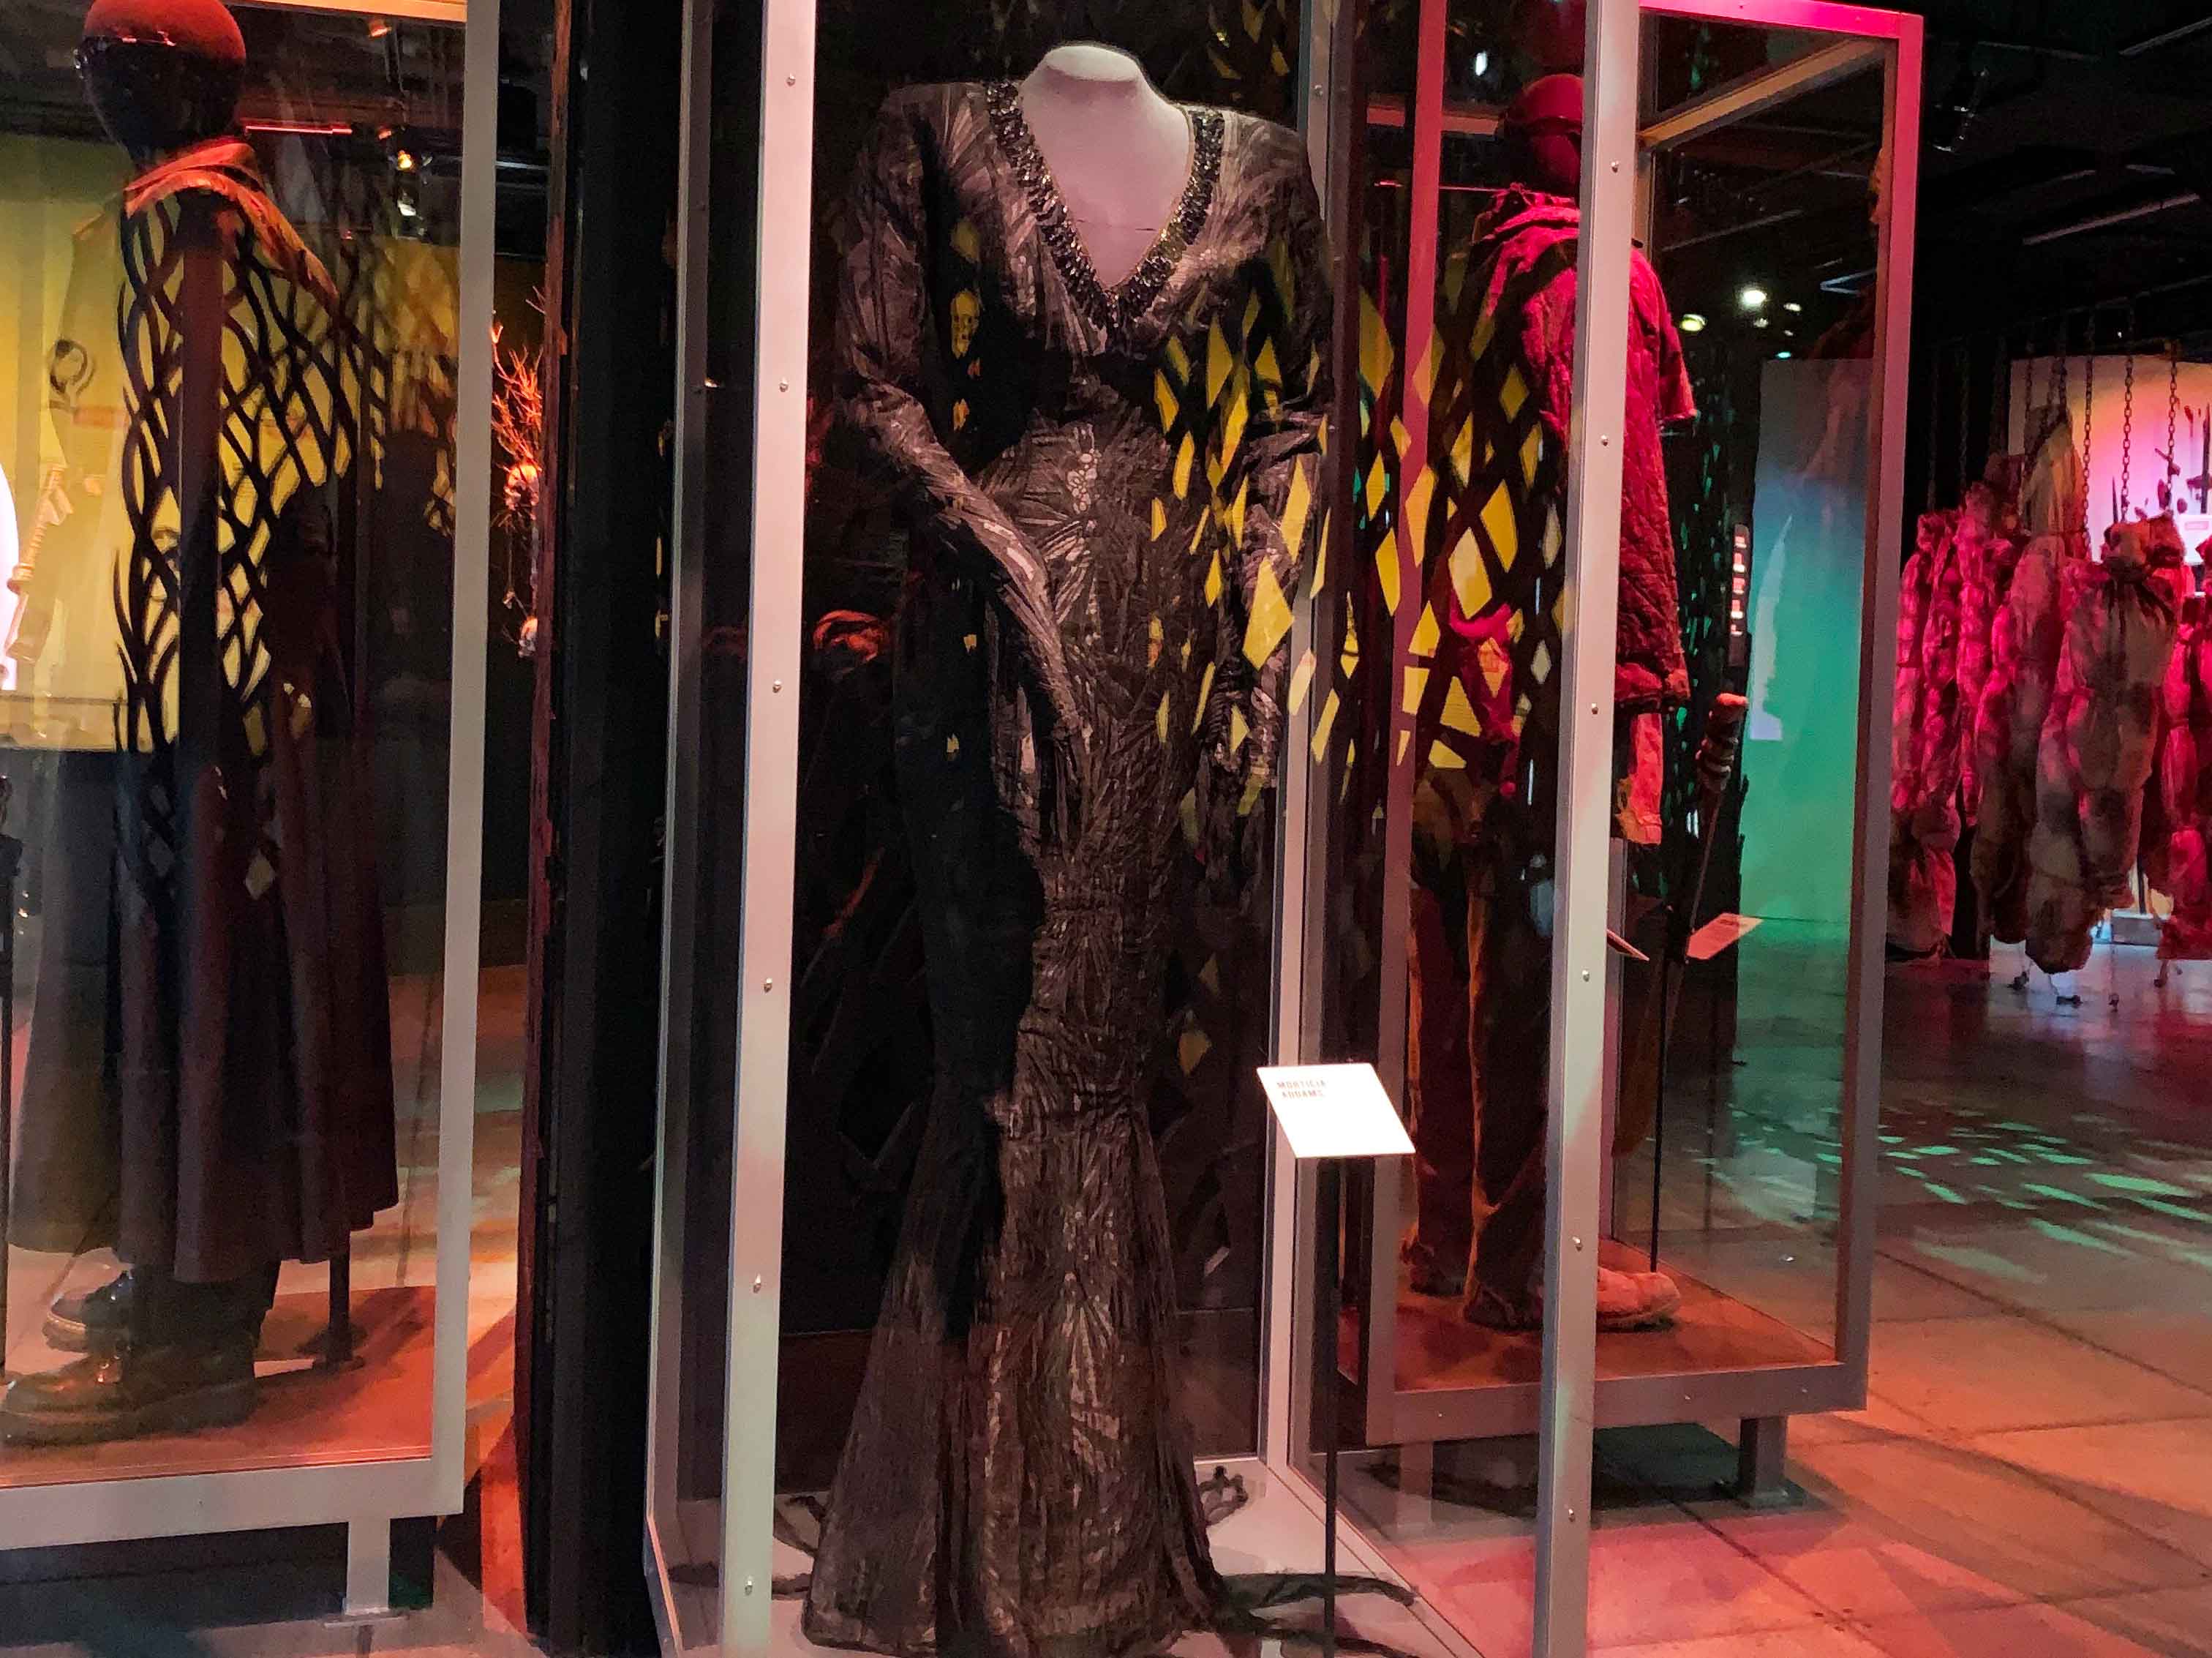 Costume Worn by Anjelica Huston in 'The Addams Family' (1991) and 'Addams Family Values' (1993) Added to 'Scared to Death: The Thrill of Horror Film' at MoPOP